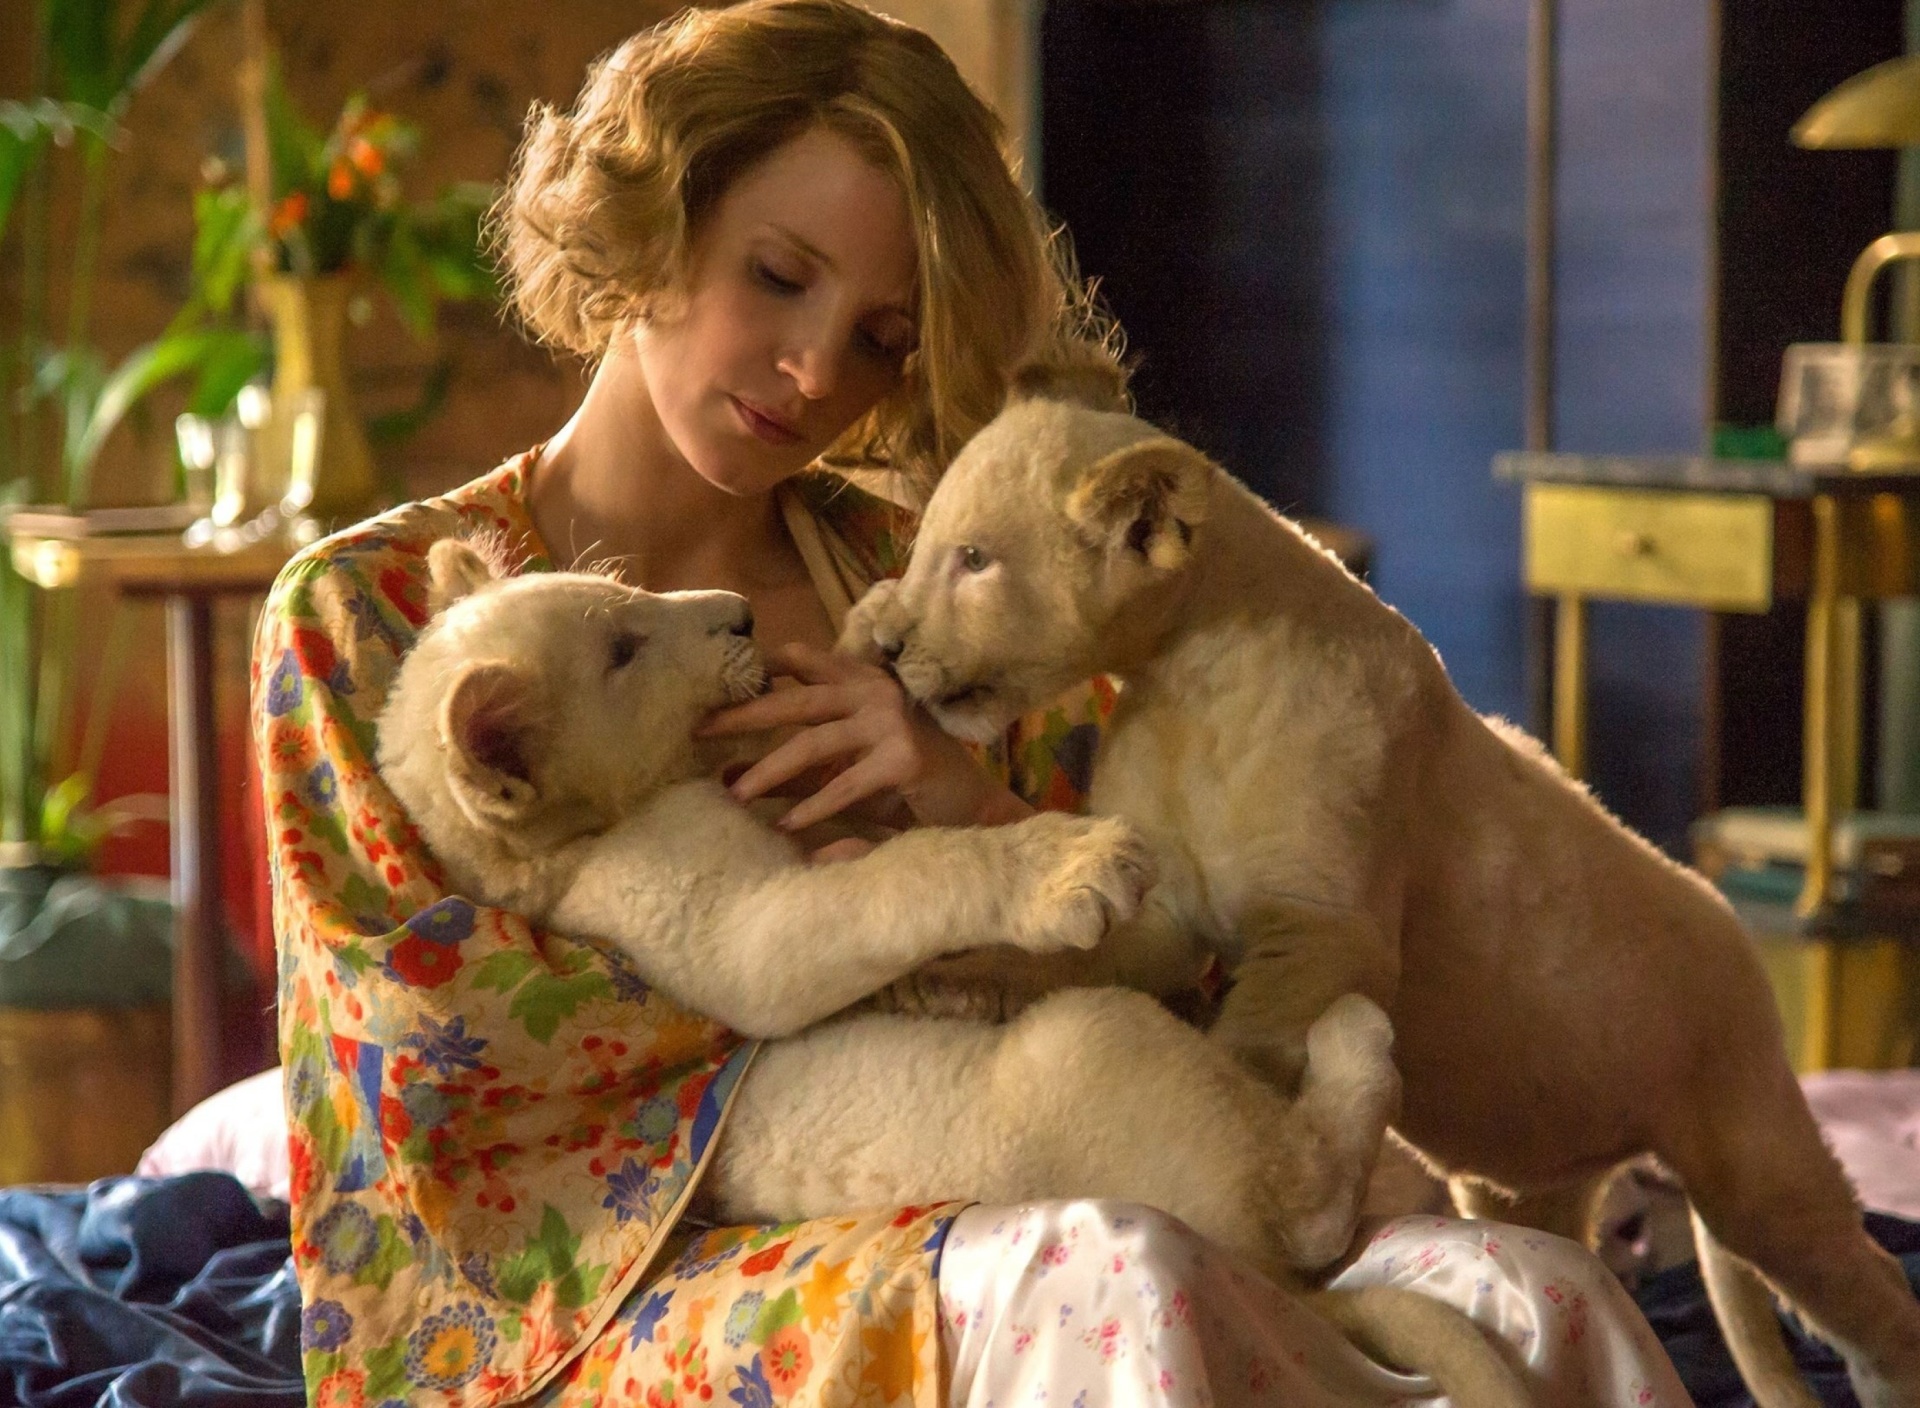 The Zookeepers Wife Film with Jessica Chastain screenshot #1 1920x1408